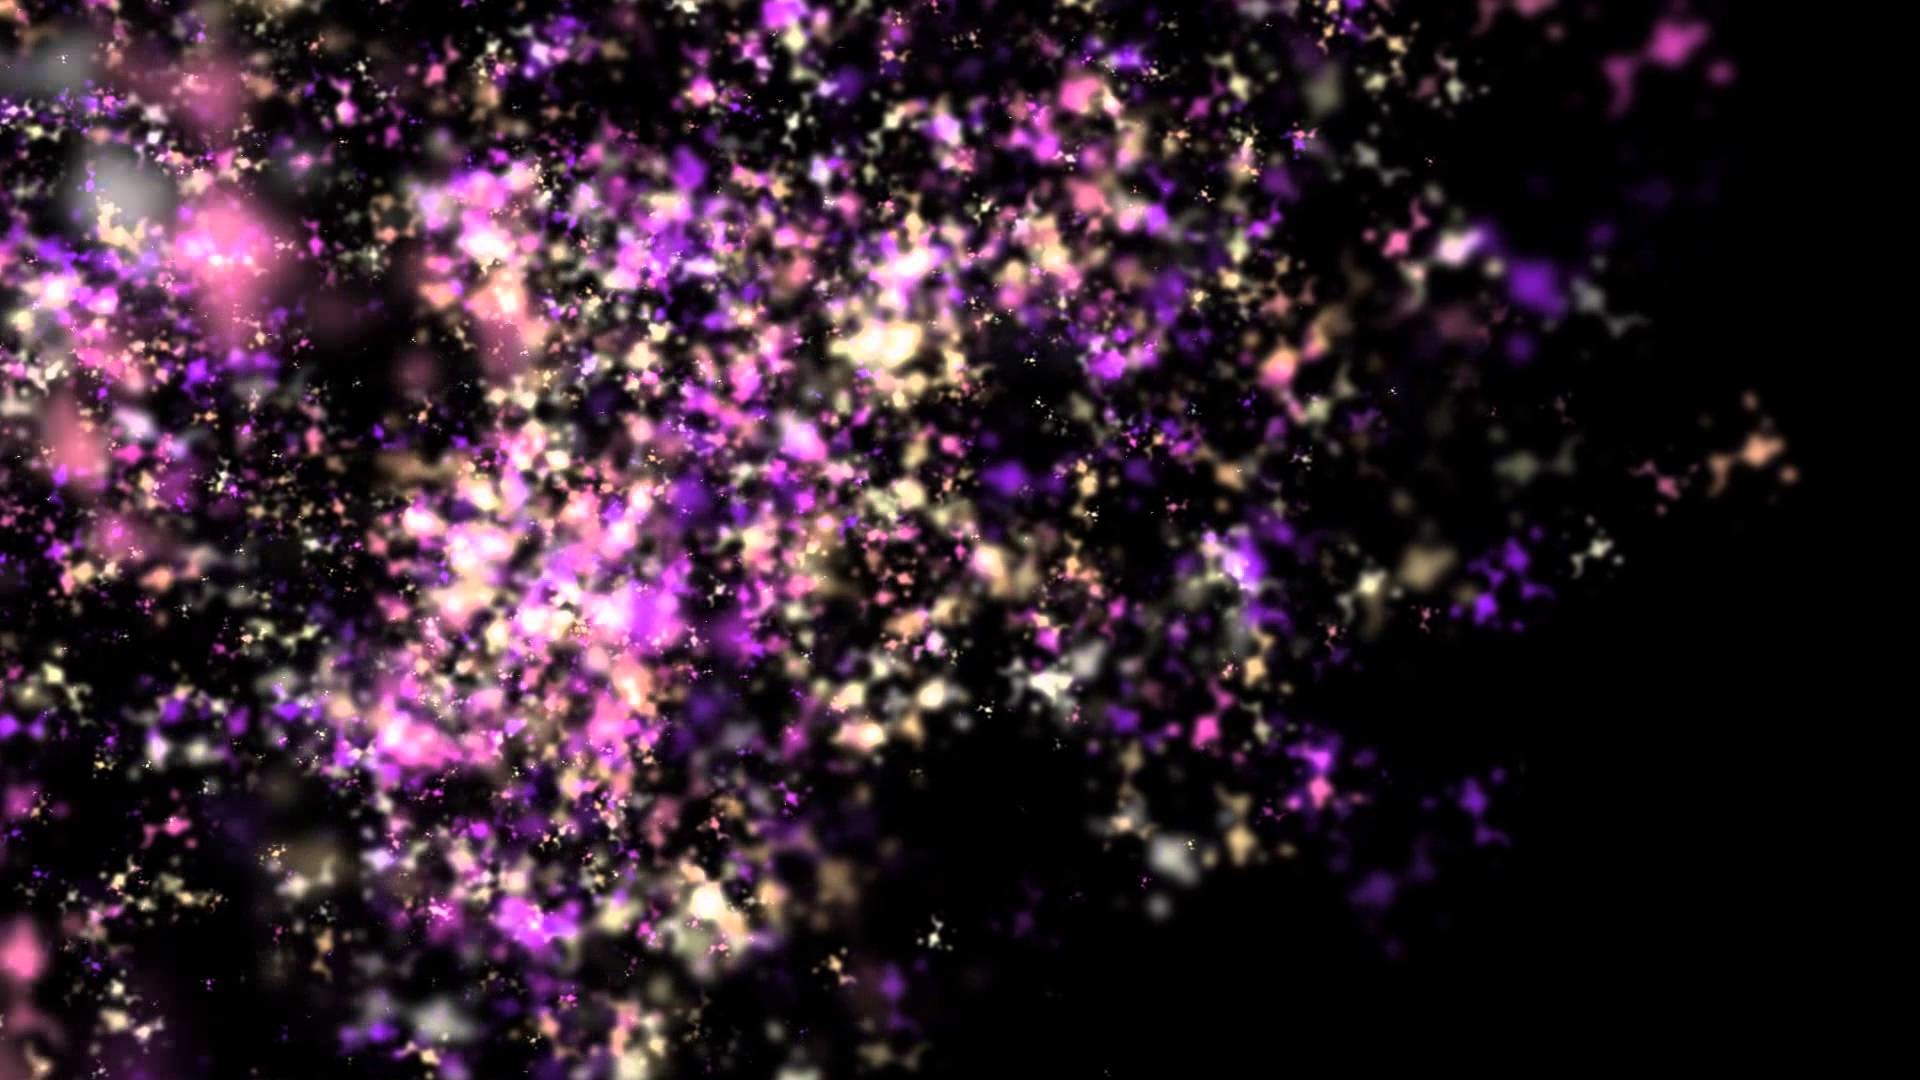 Background ANIMATION FREE FOOTAGE HD Particles Alive Purple Black Background – YouTube